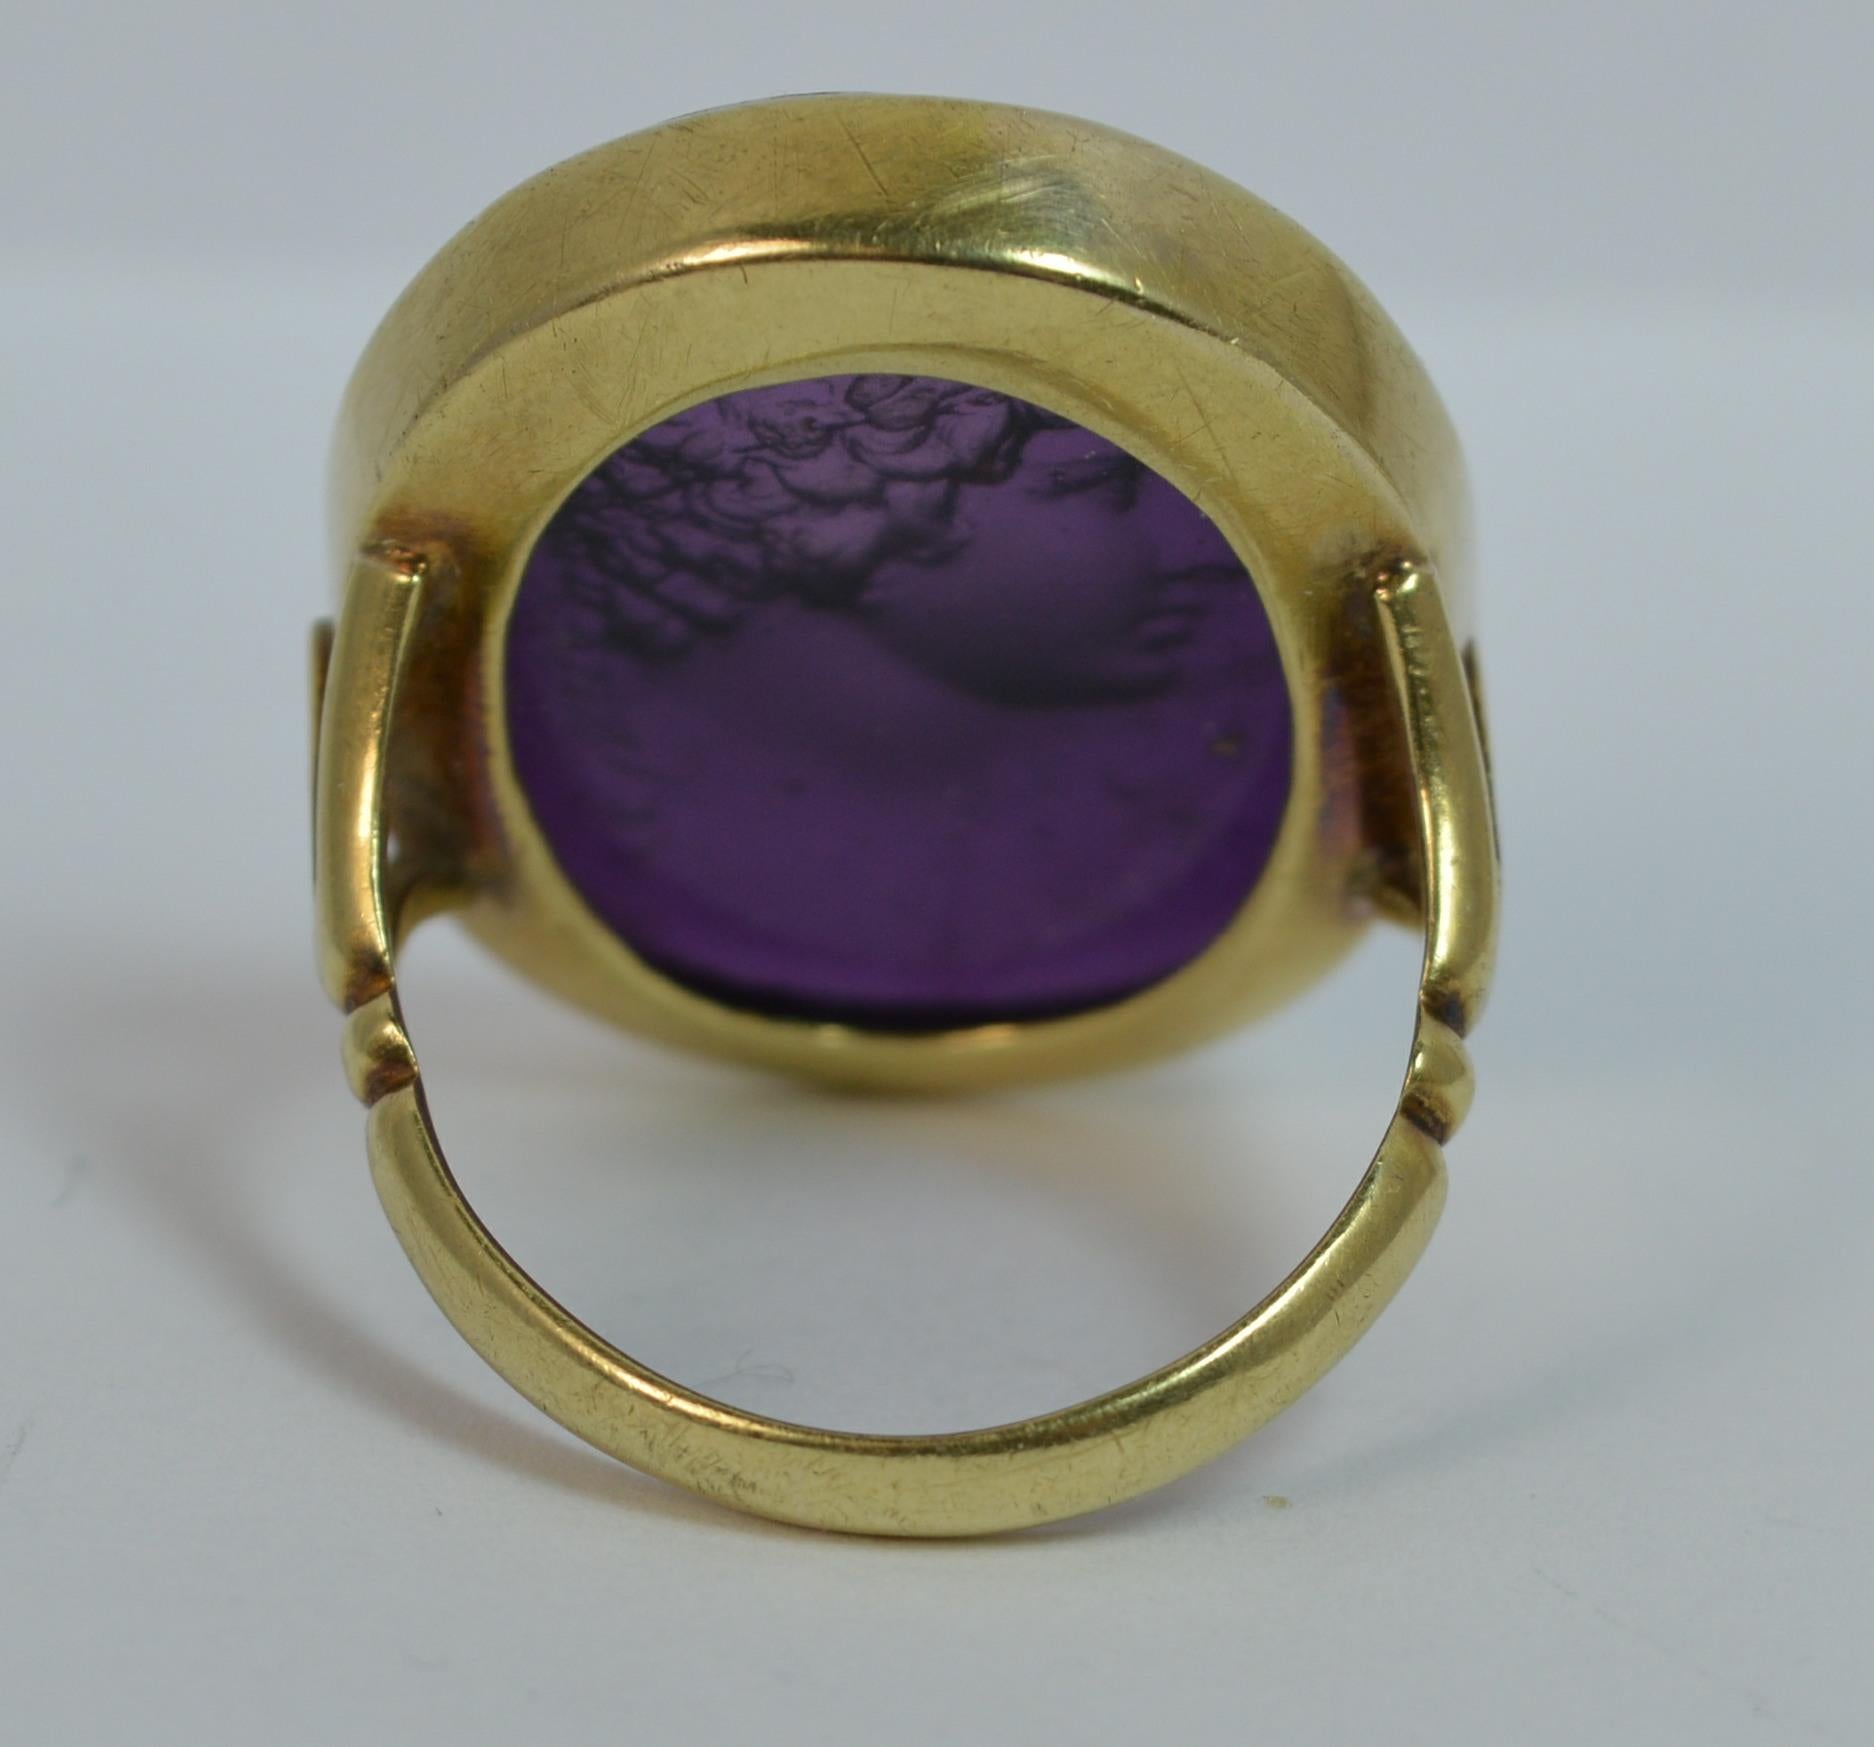 Early Victorian 18 Carat Gold and Purple Glass Intaglio Seal Signet Ring 1